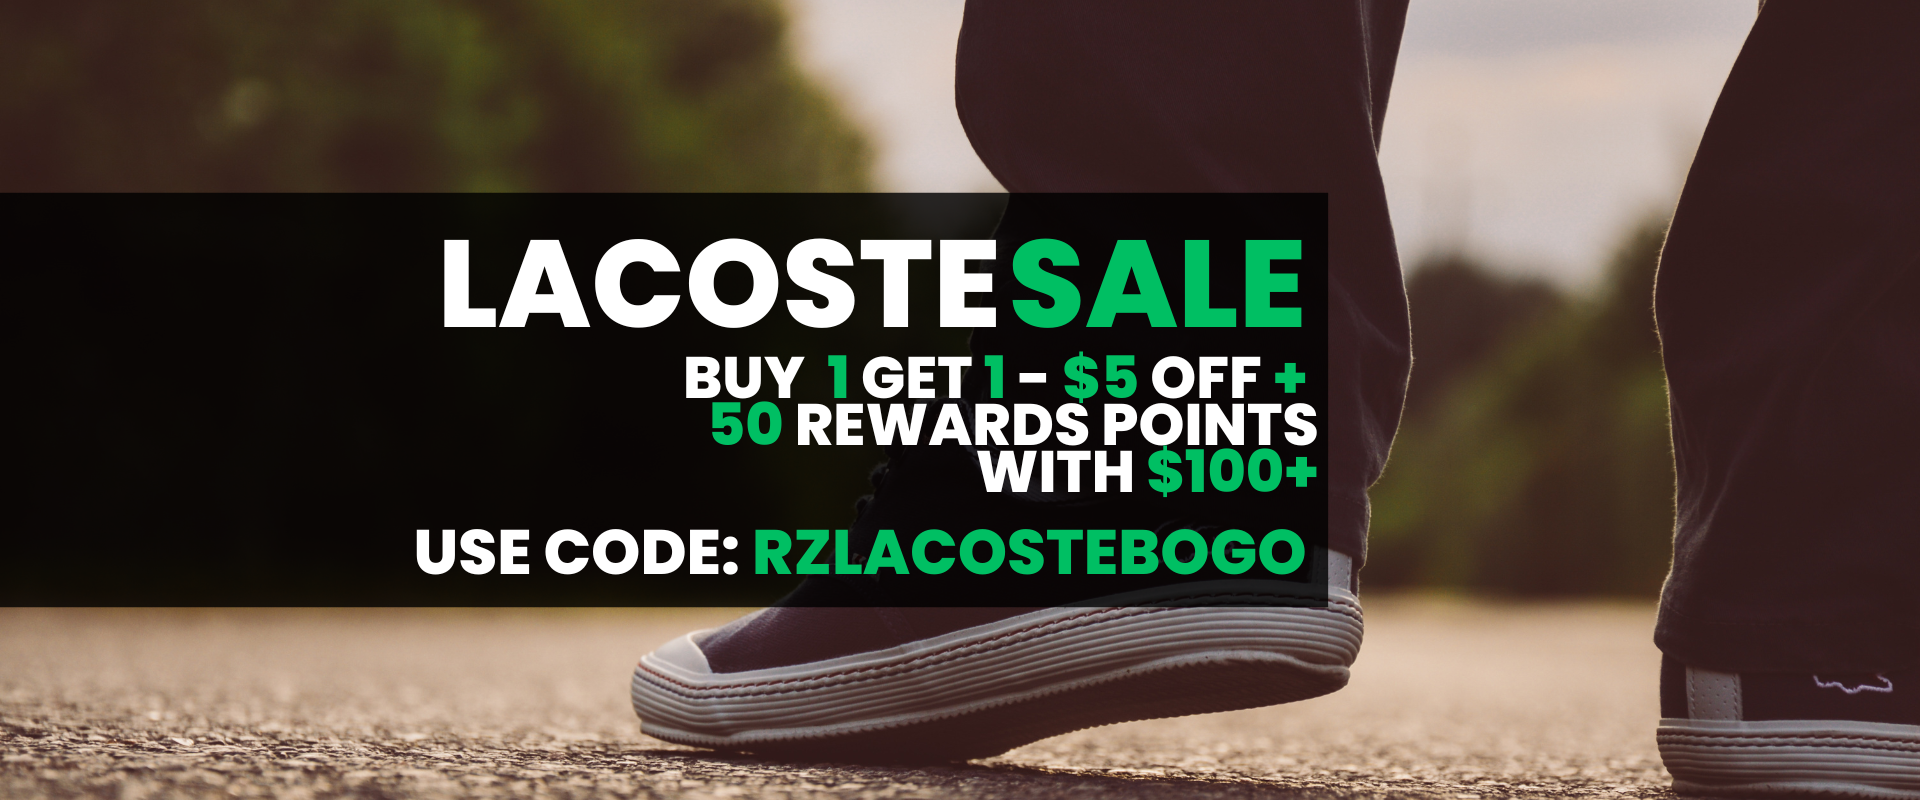 Lacoste Sale -$5 OFF + 100 Points with $100+